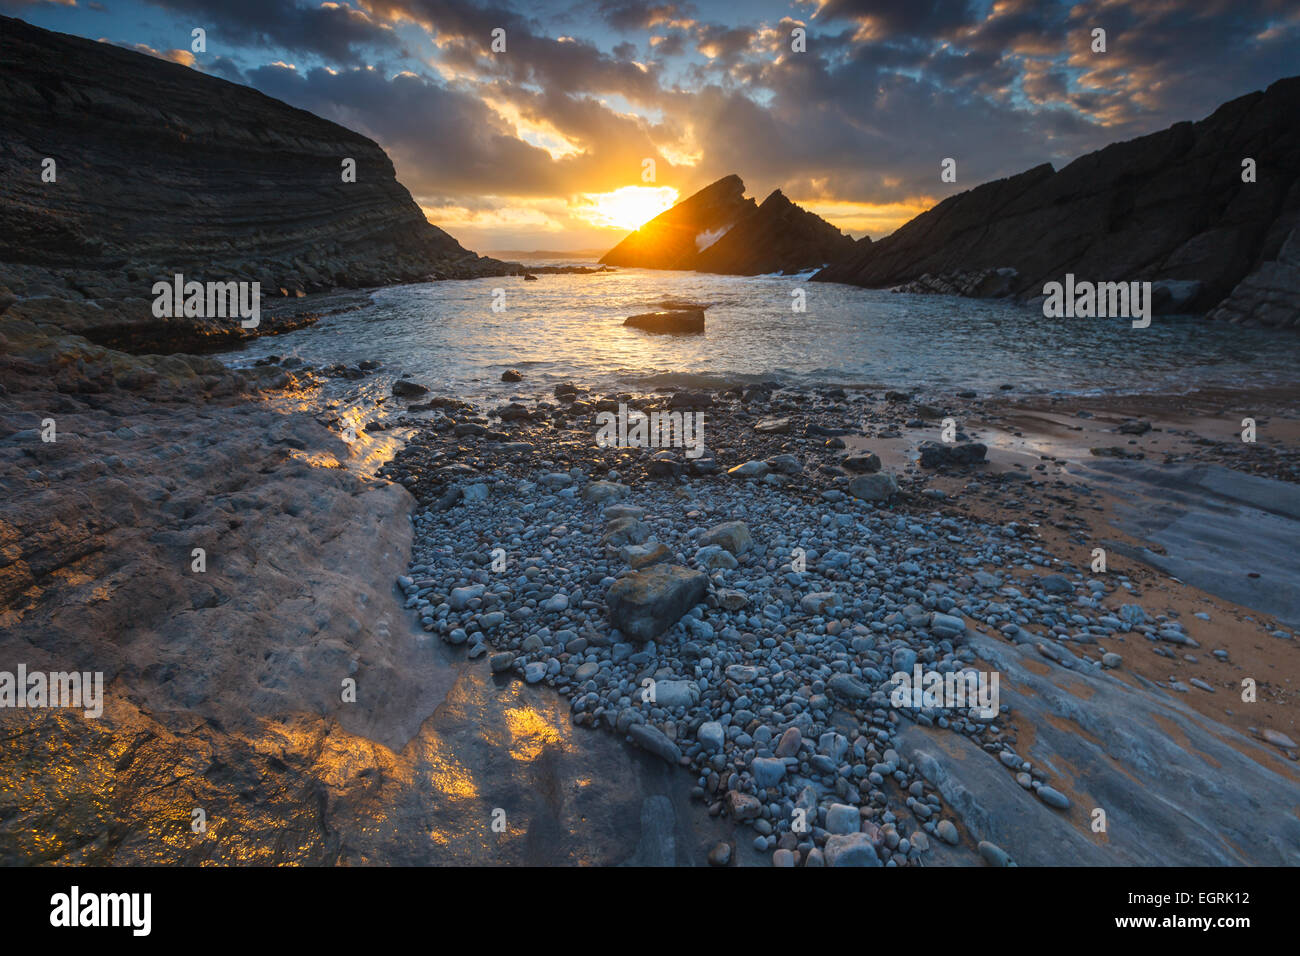 El Madero beach by sunset. Liencres, Cantabria, Spain. Stock Photo